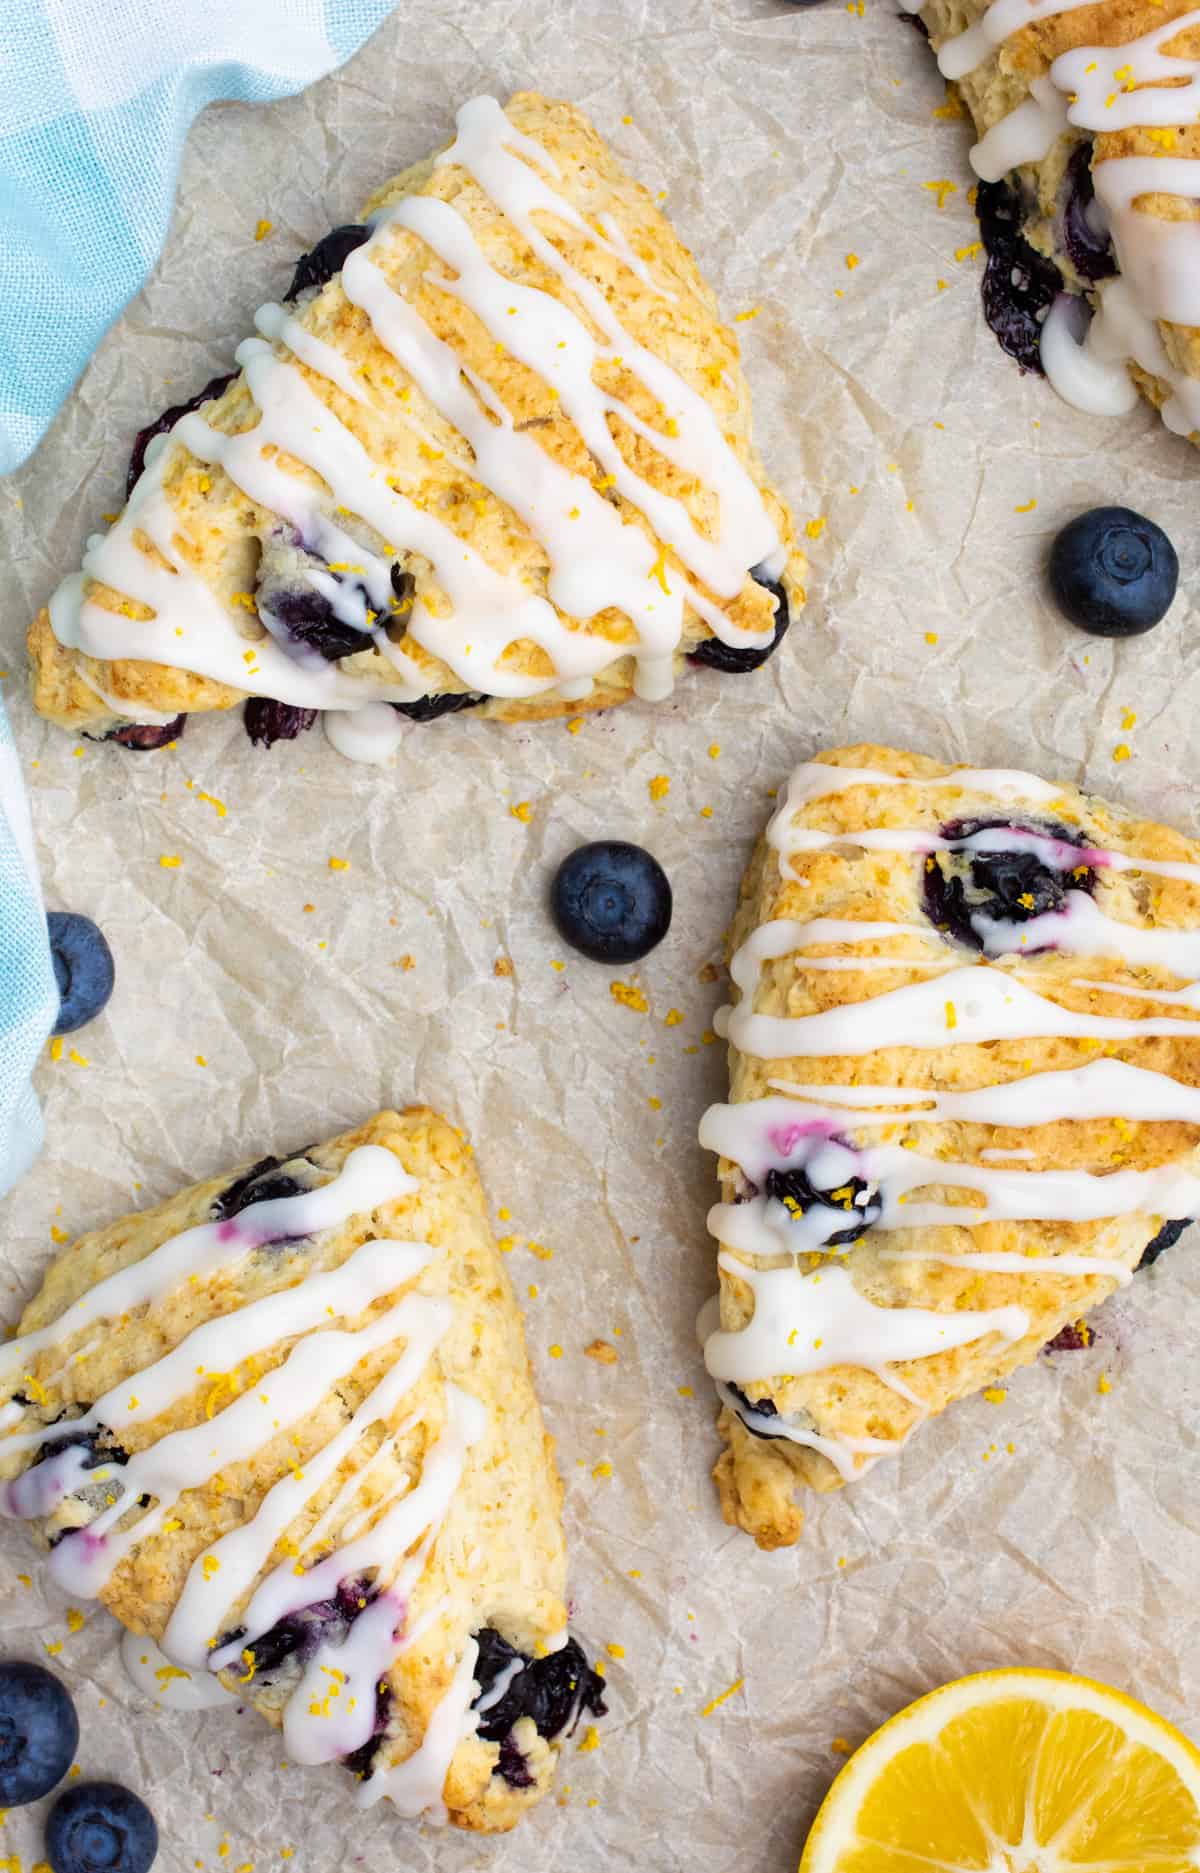 Blueberry scones topped with icing on brown parchment paper.